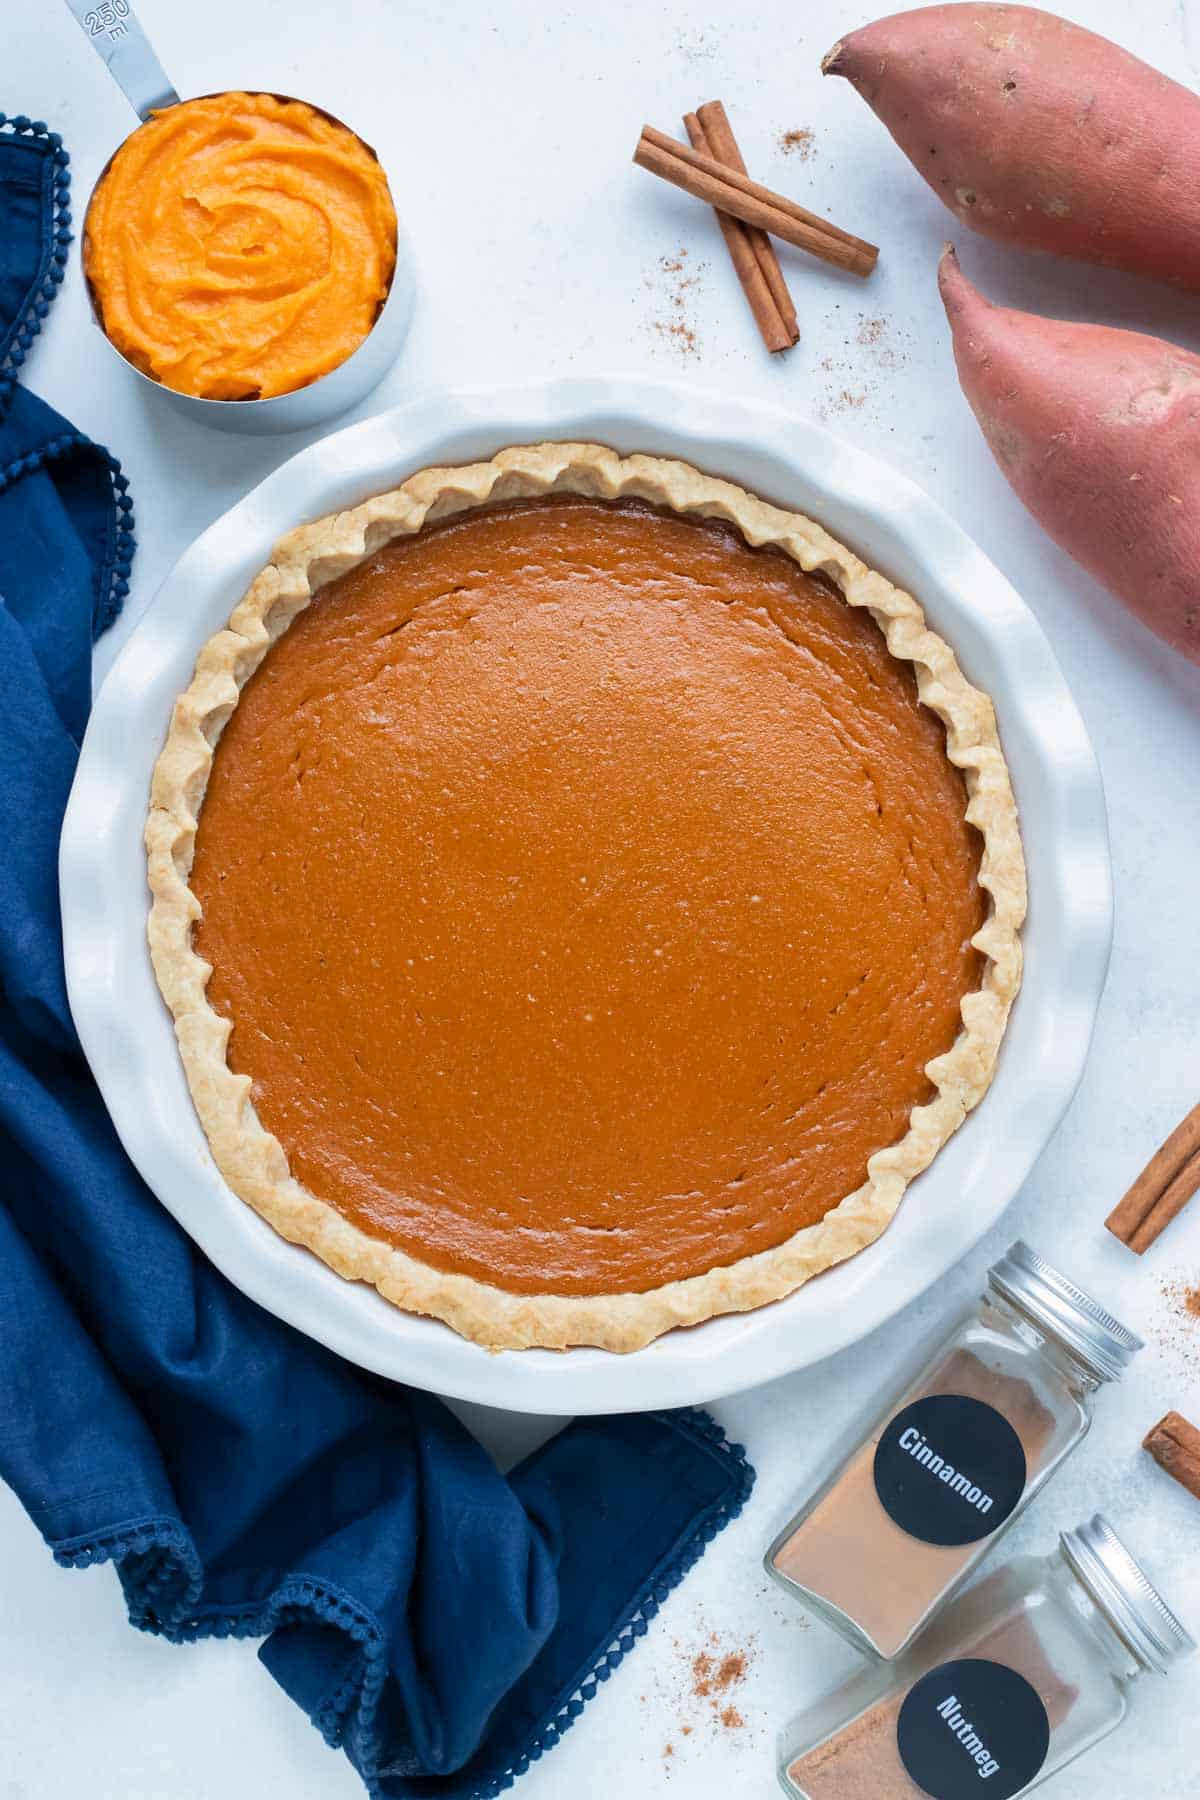 Southern sweet potato pie is served from a pie pan on the counter.